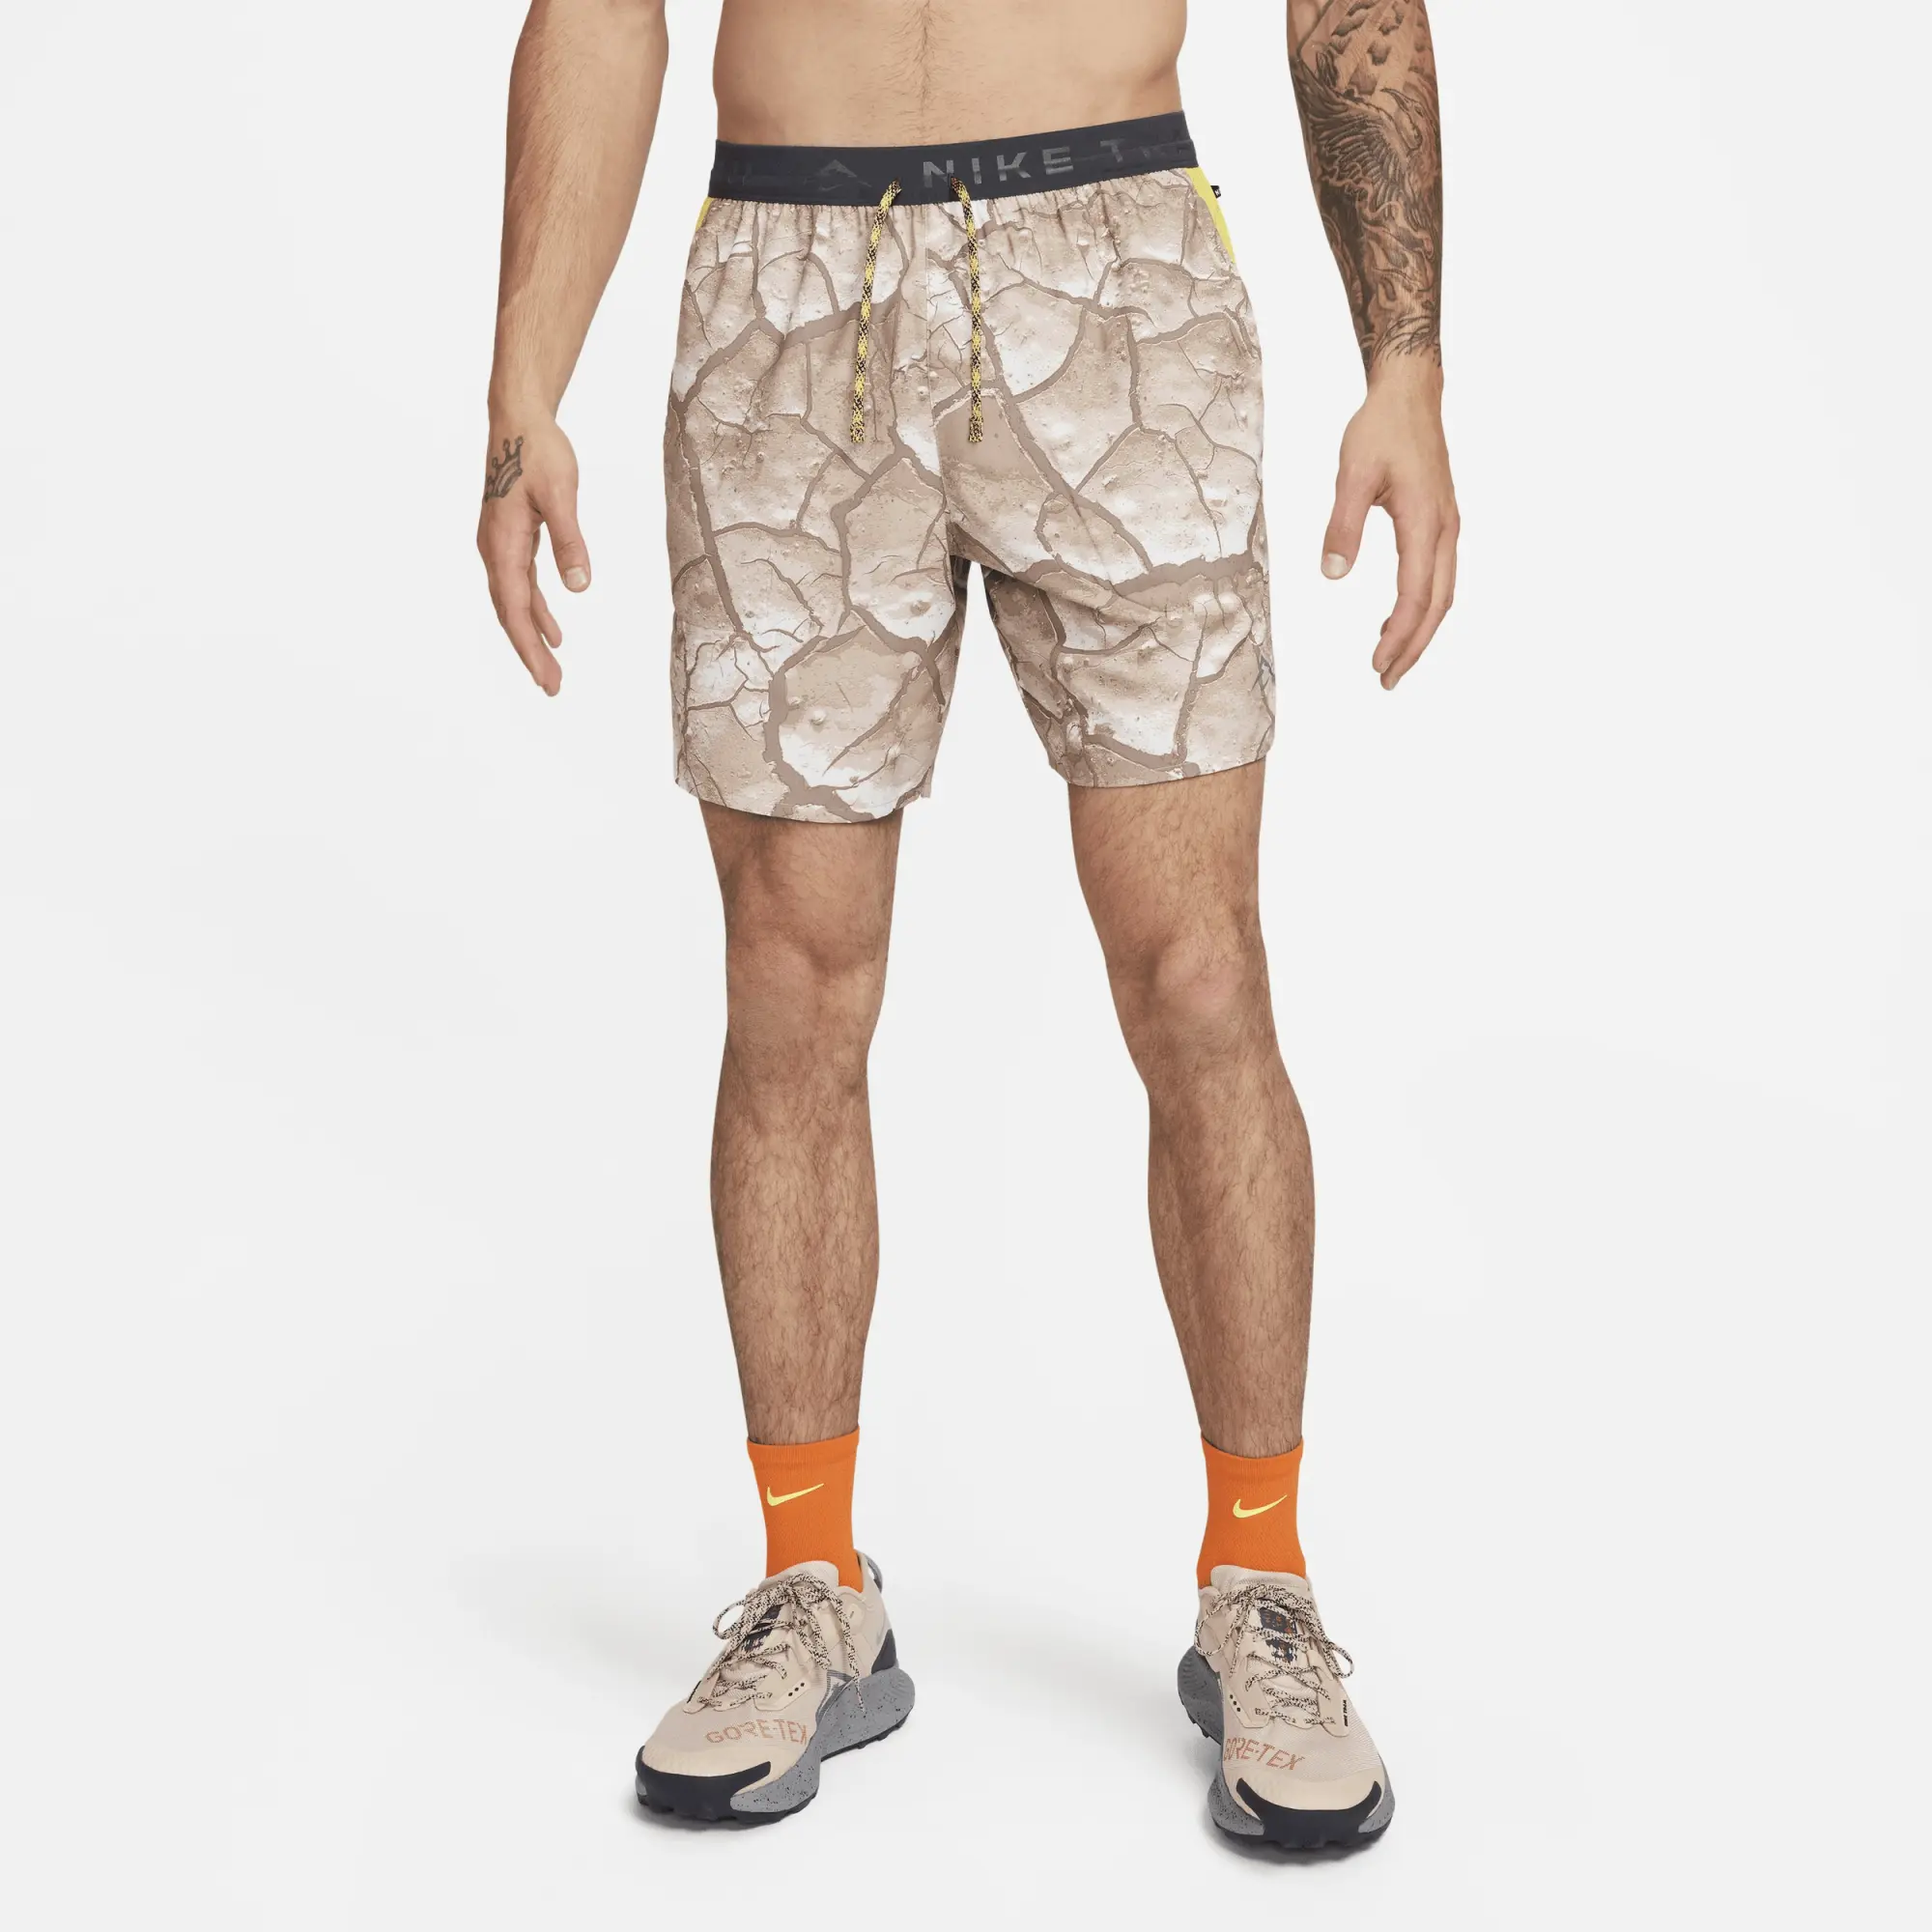 Nike Dri-FIT Stride Men's 18cm (approx.) Brief-Lined Printed Running Shorts - Brown